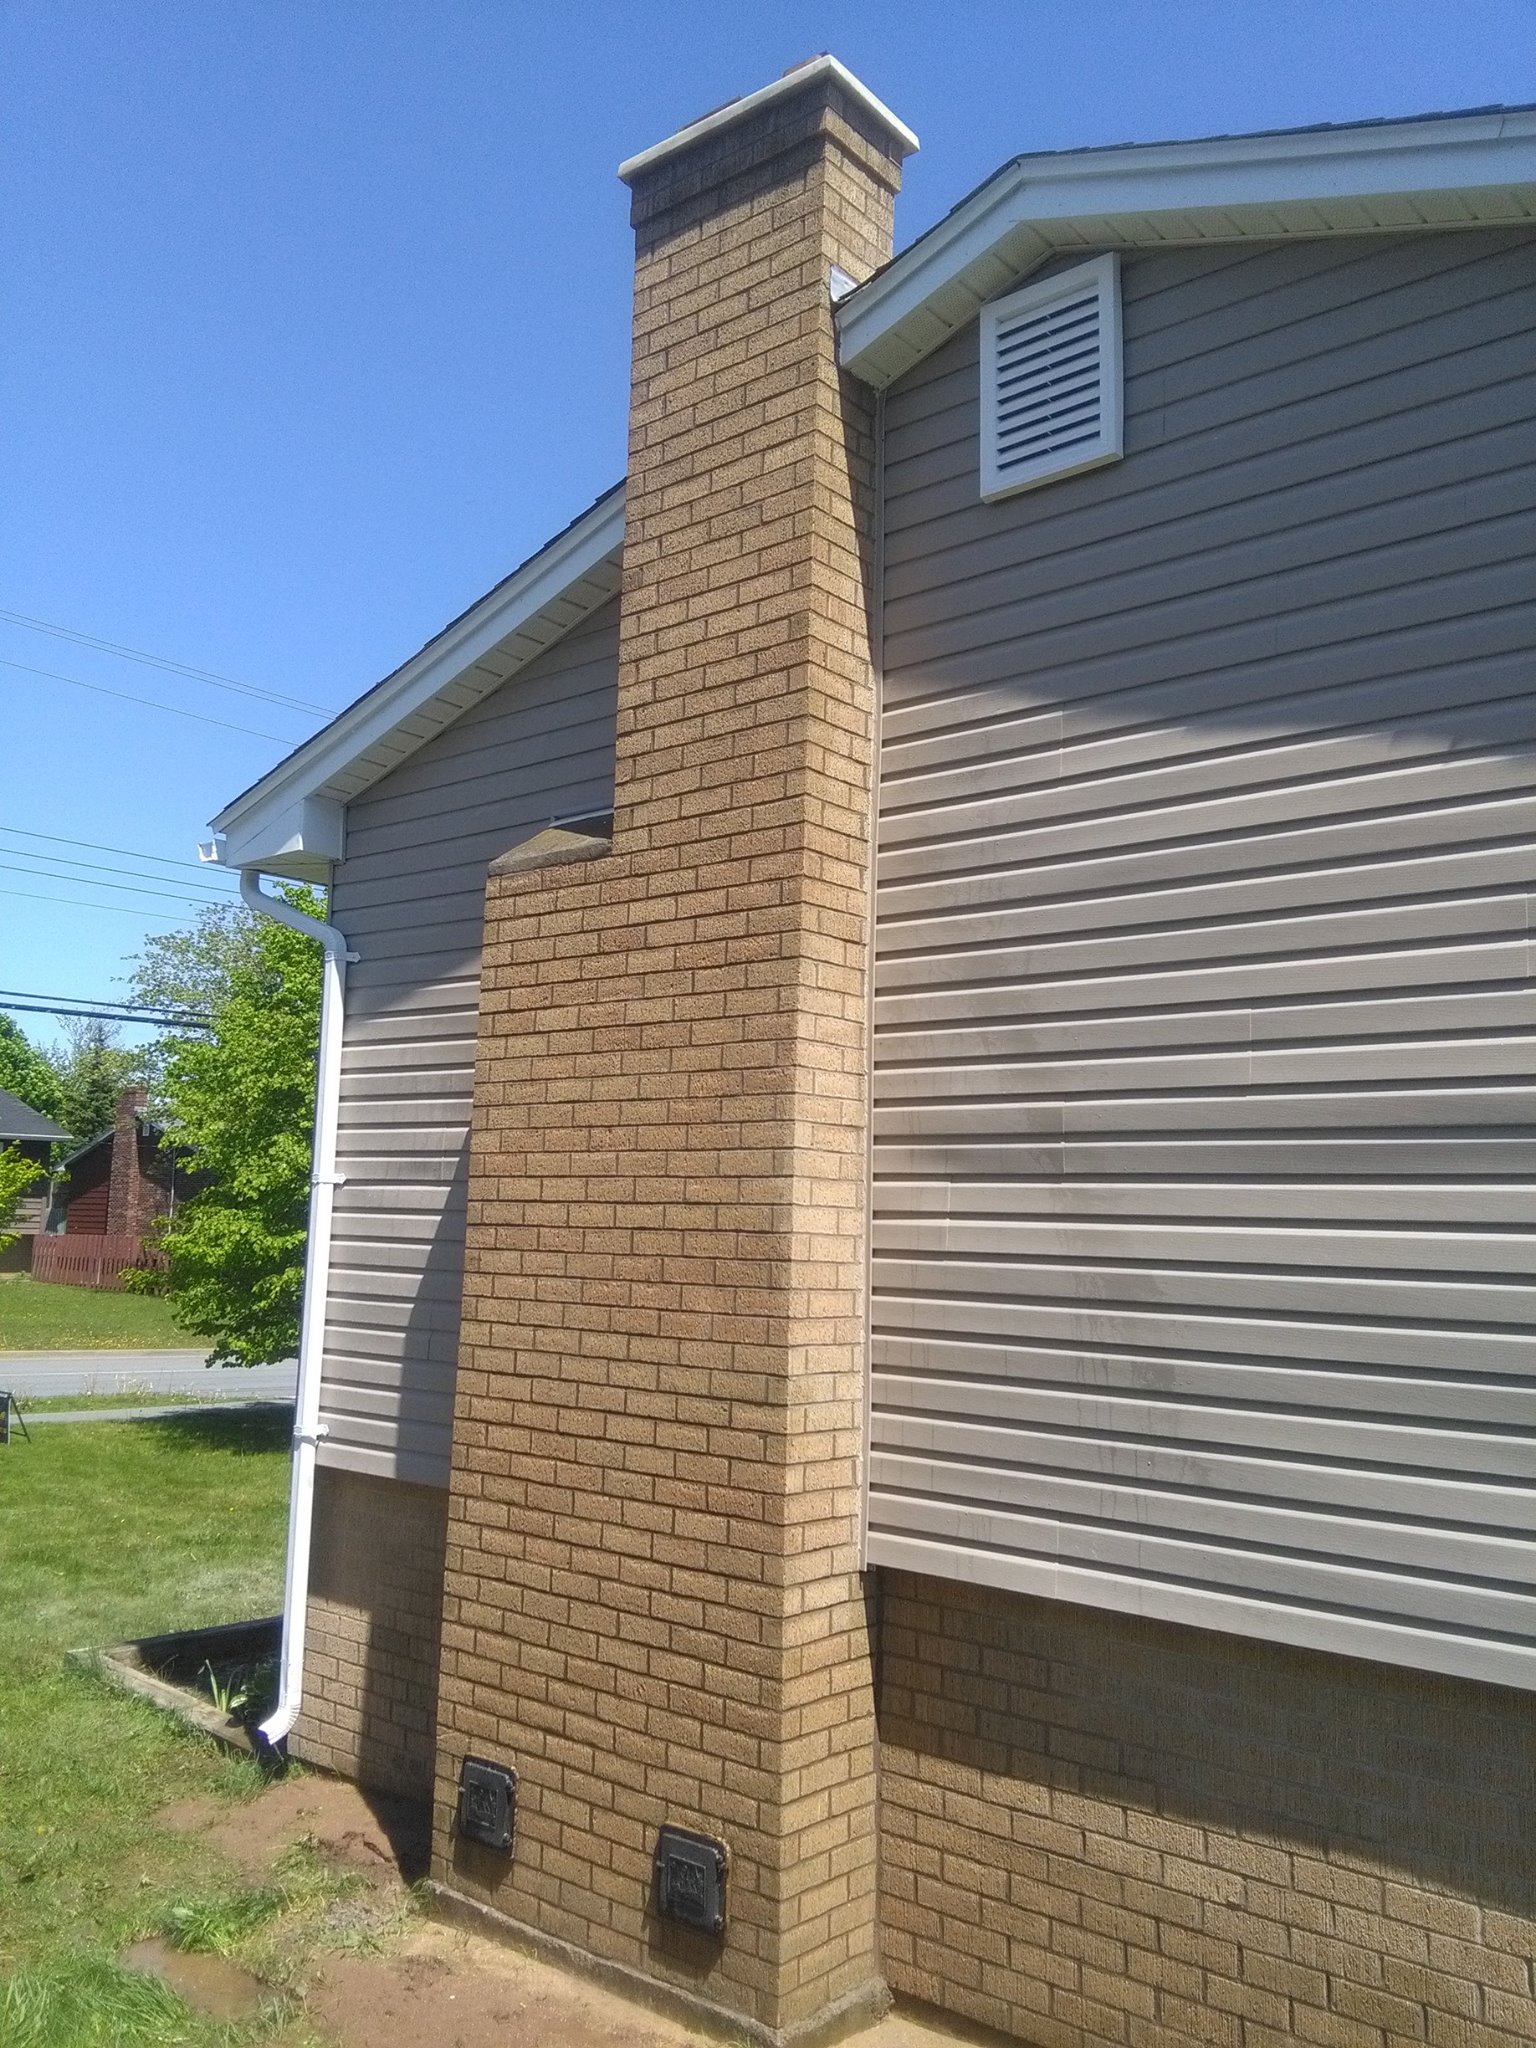 image of chimney repair-masonry chimney repair services completed in Halifax, NS by Pro Chimney Services based in Halifax, NS servicing all of the Halifax-Dartmouth Regional Municipality, Bedford, Sackville, Mount Uniacke, Hantsport, Windsor, Wolfville, Kentville, Chester Basin, Mahone Bay, Lunenburg, Bridgewater, Liverpool, Fall River, Wellington, Enfield, Elmsdale, Brookfield, Truro, Musquodoboit Harbour & surrounding areas.